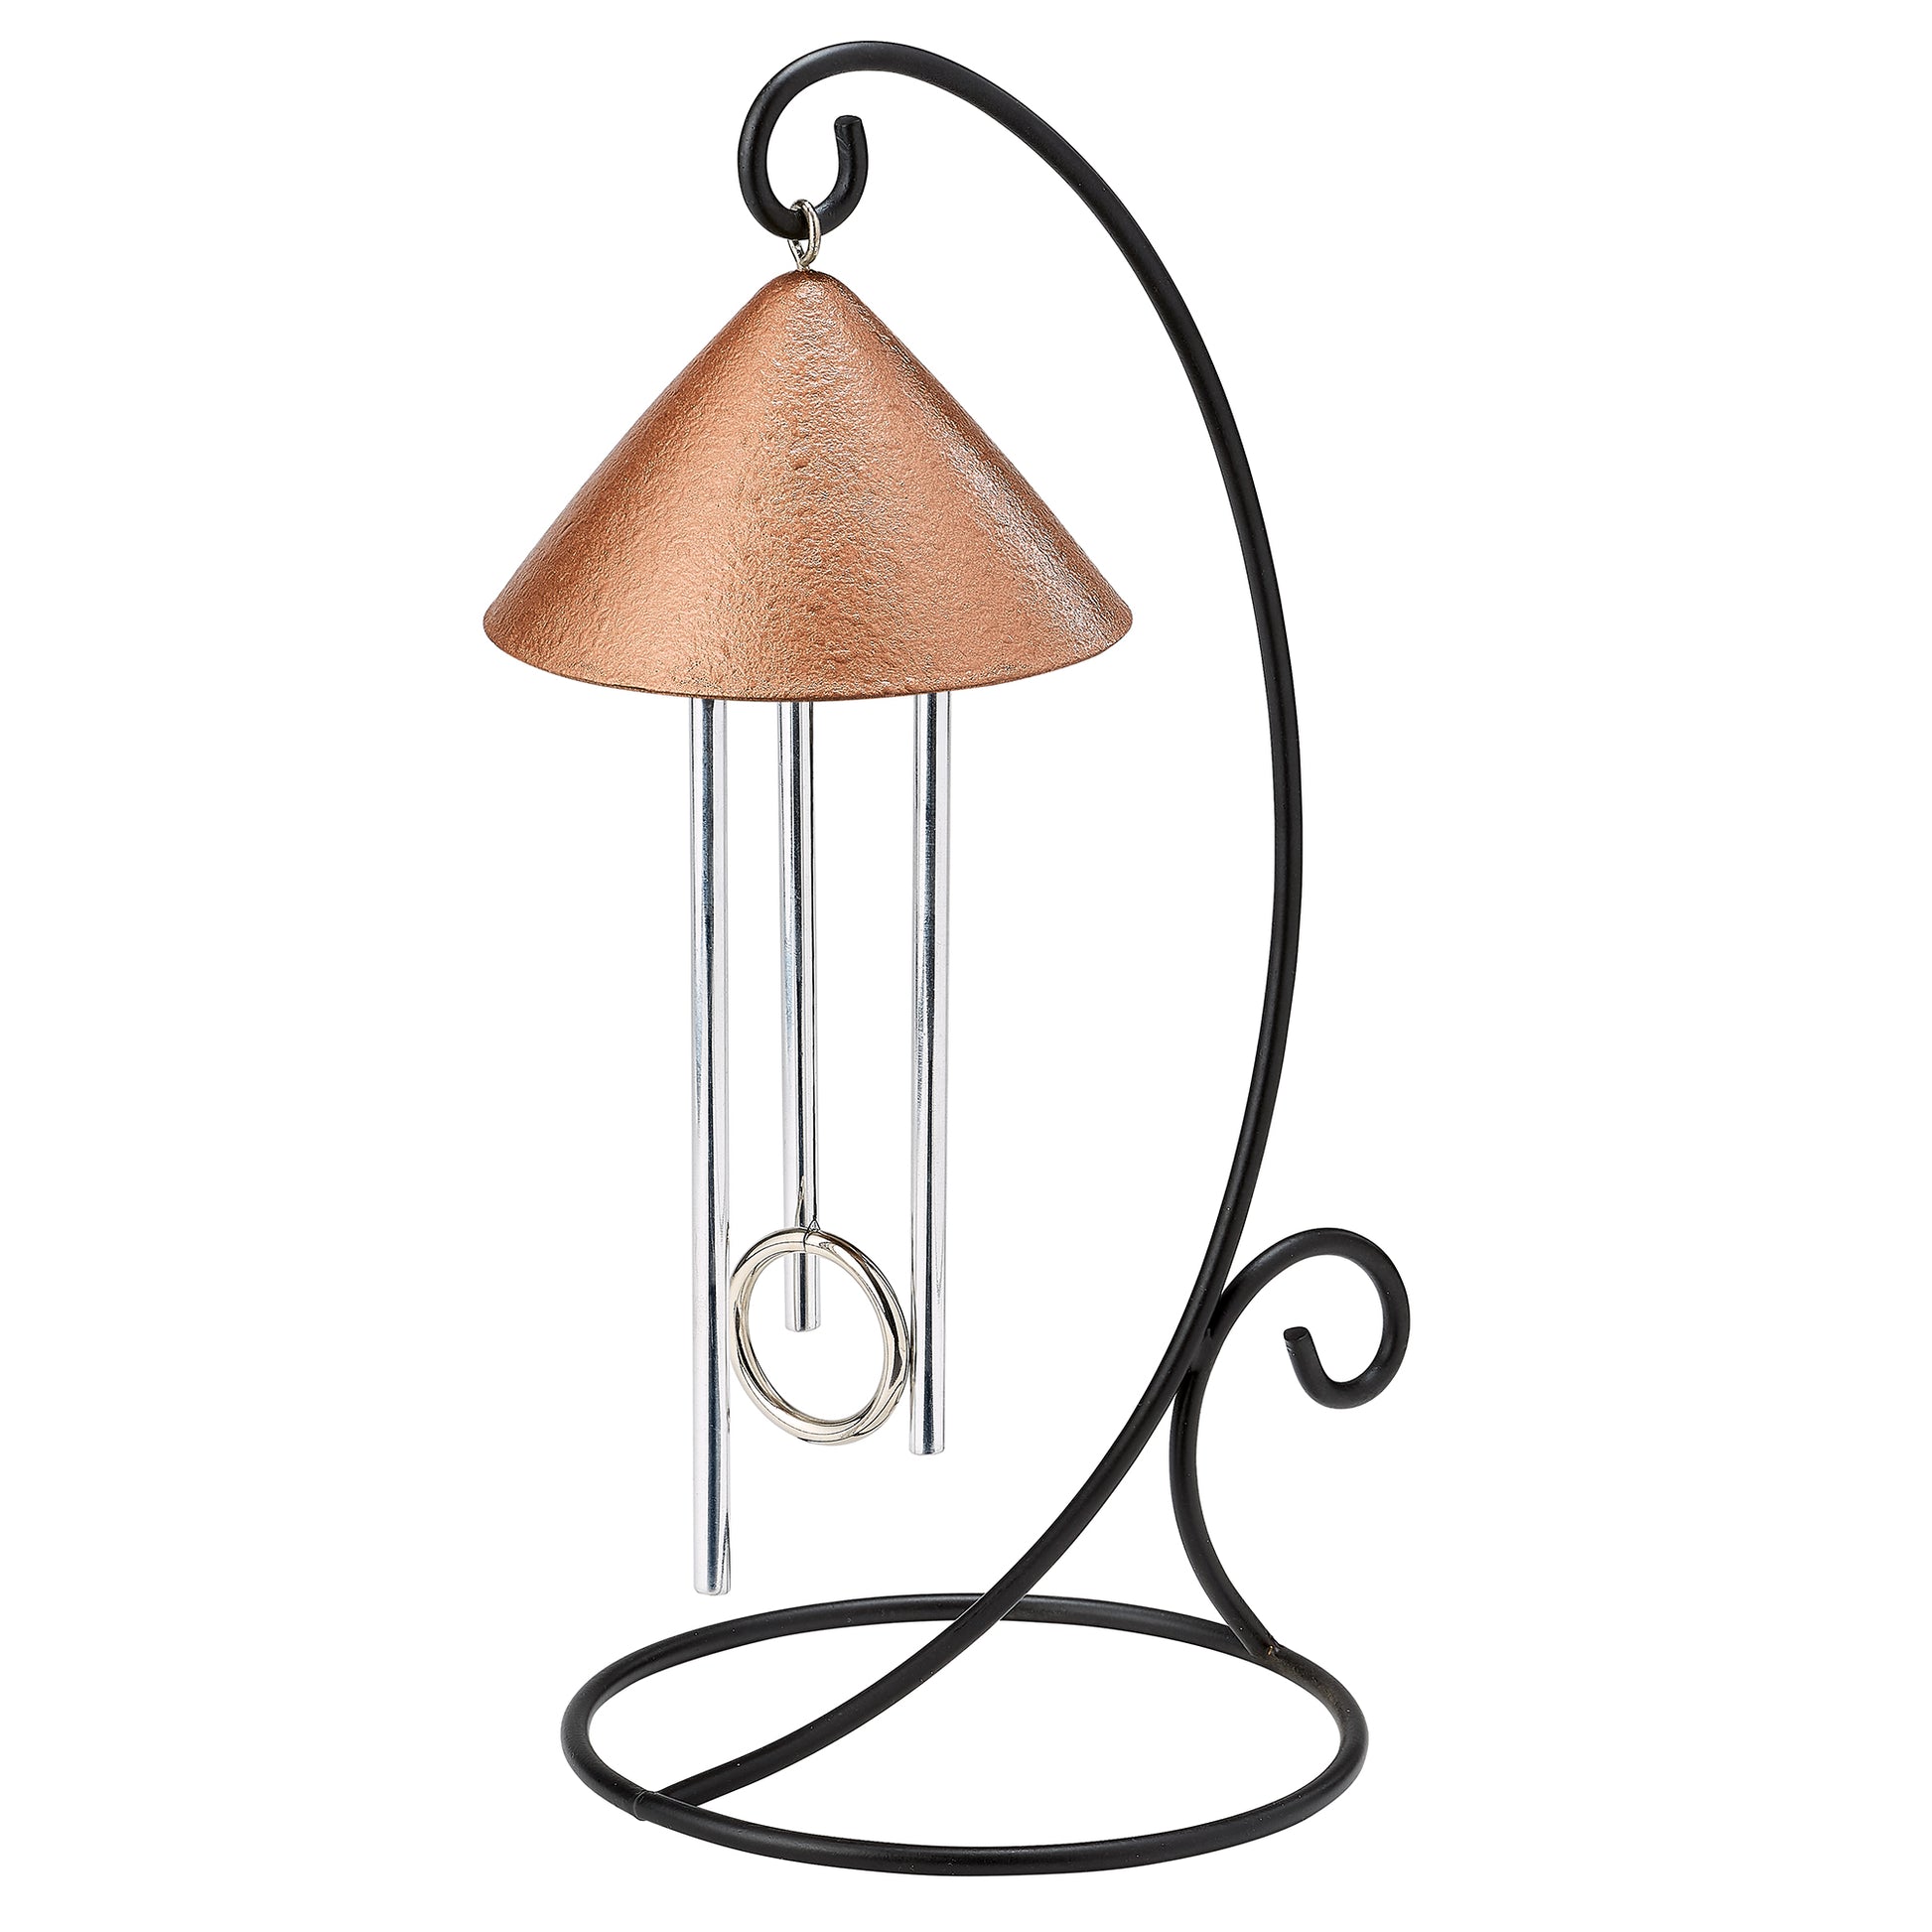 Indoor Tabletop solar wind chime in hammered copper color made in US